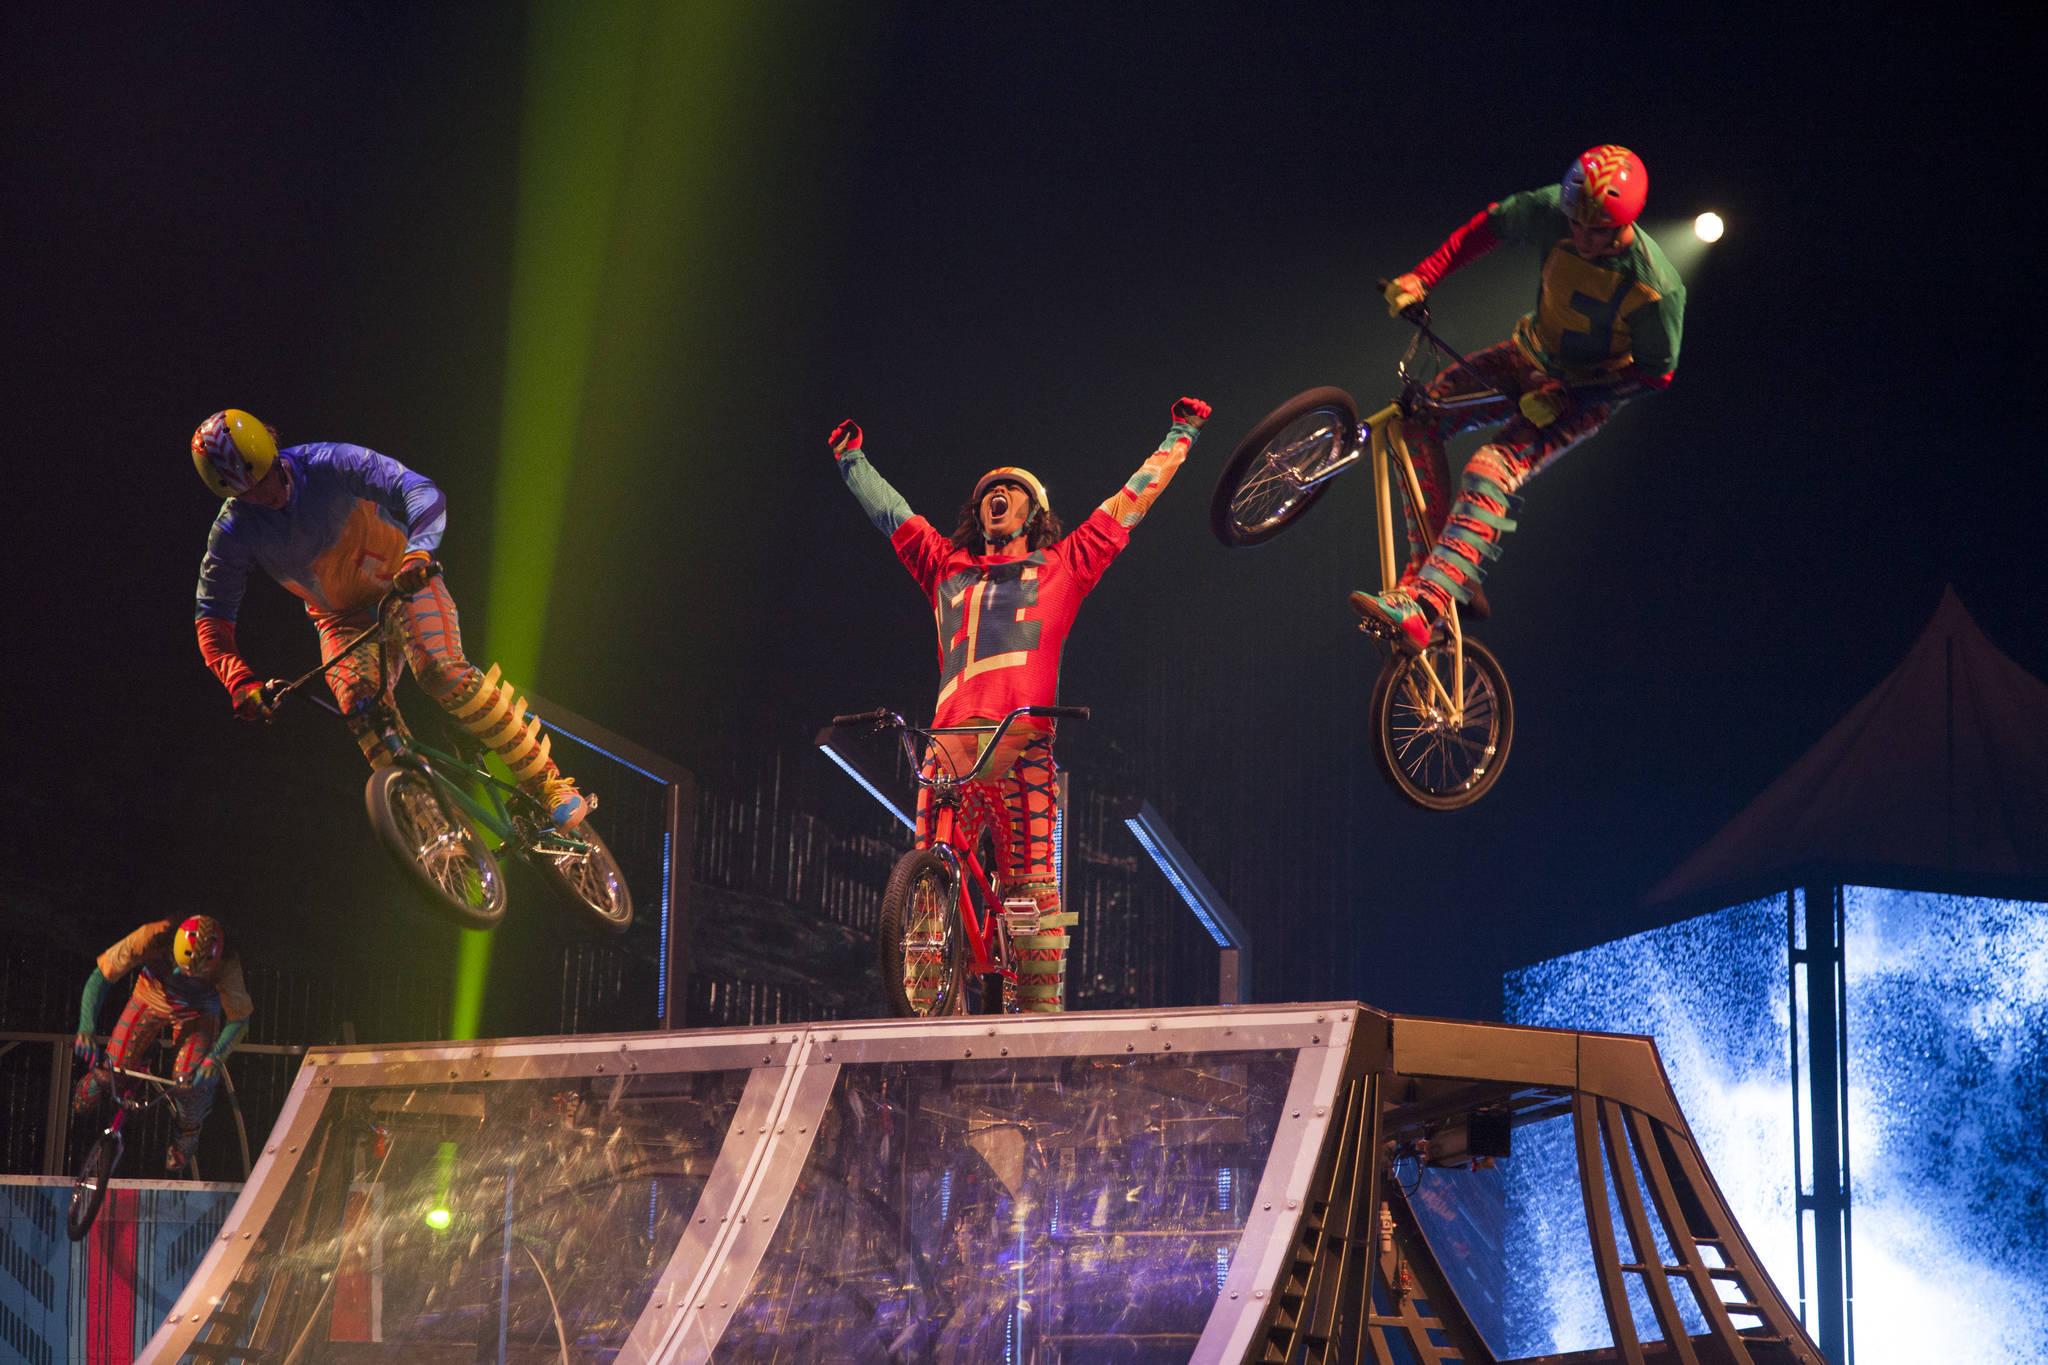 The finale of ‘Volta’ brings the X Games to Cirque du Soleil. Photo by Patrice Lamoureux